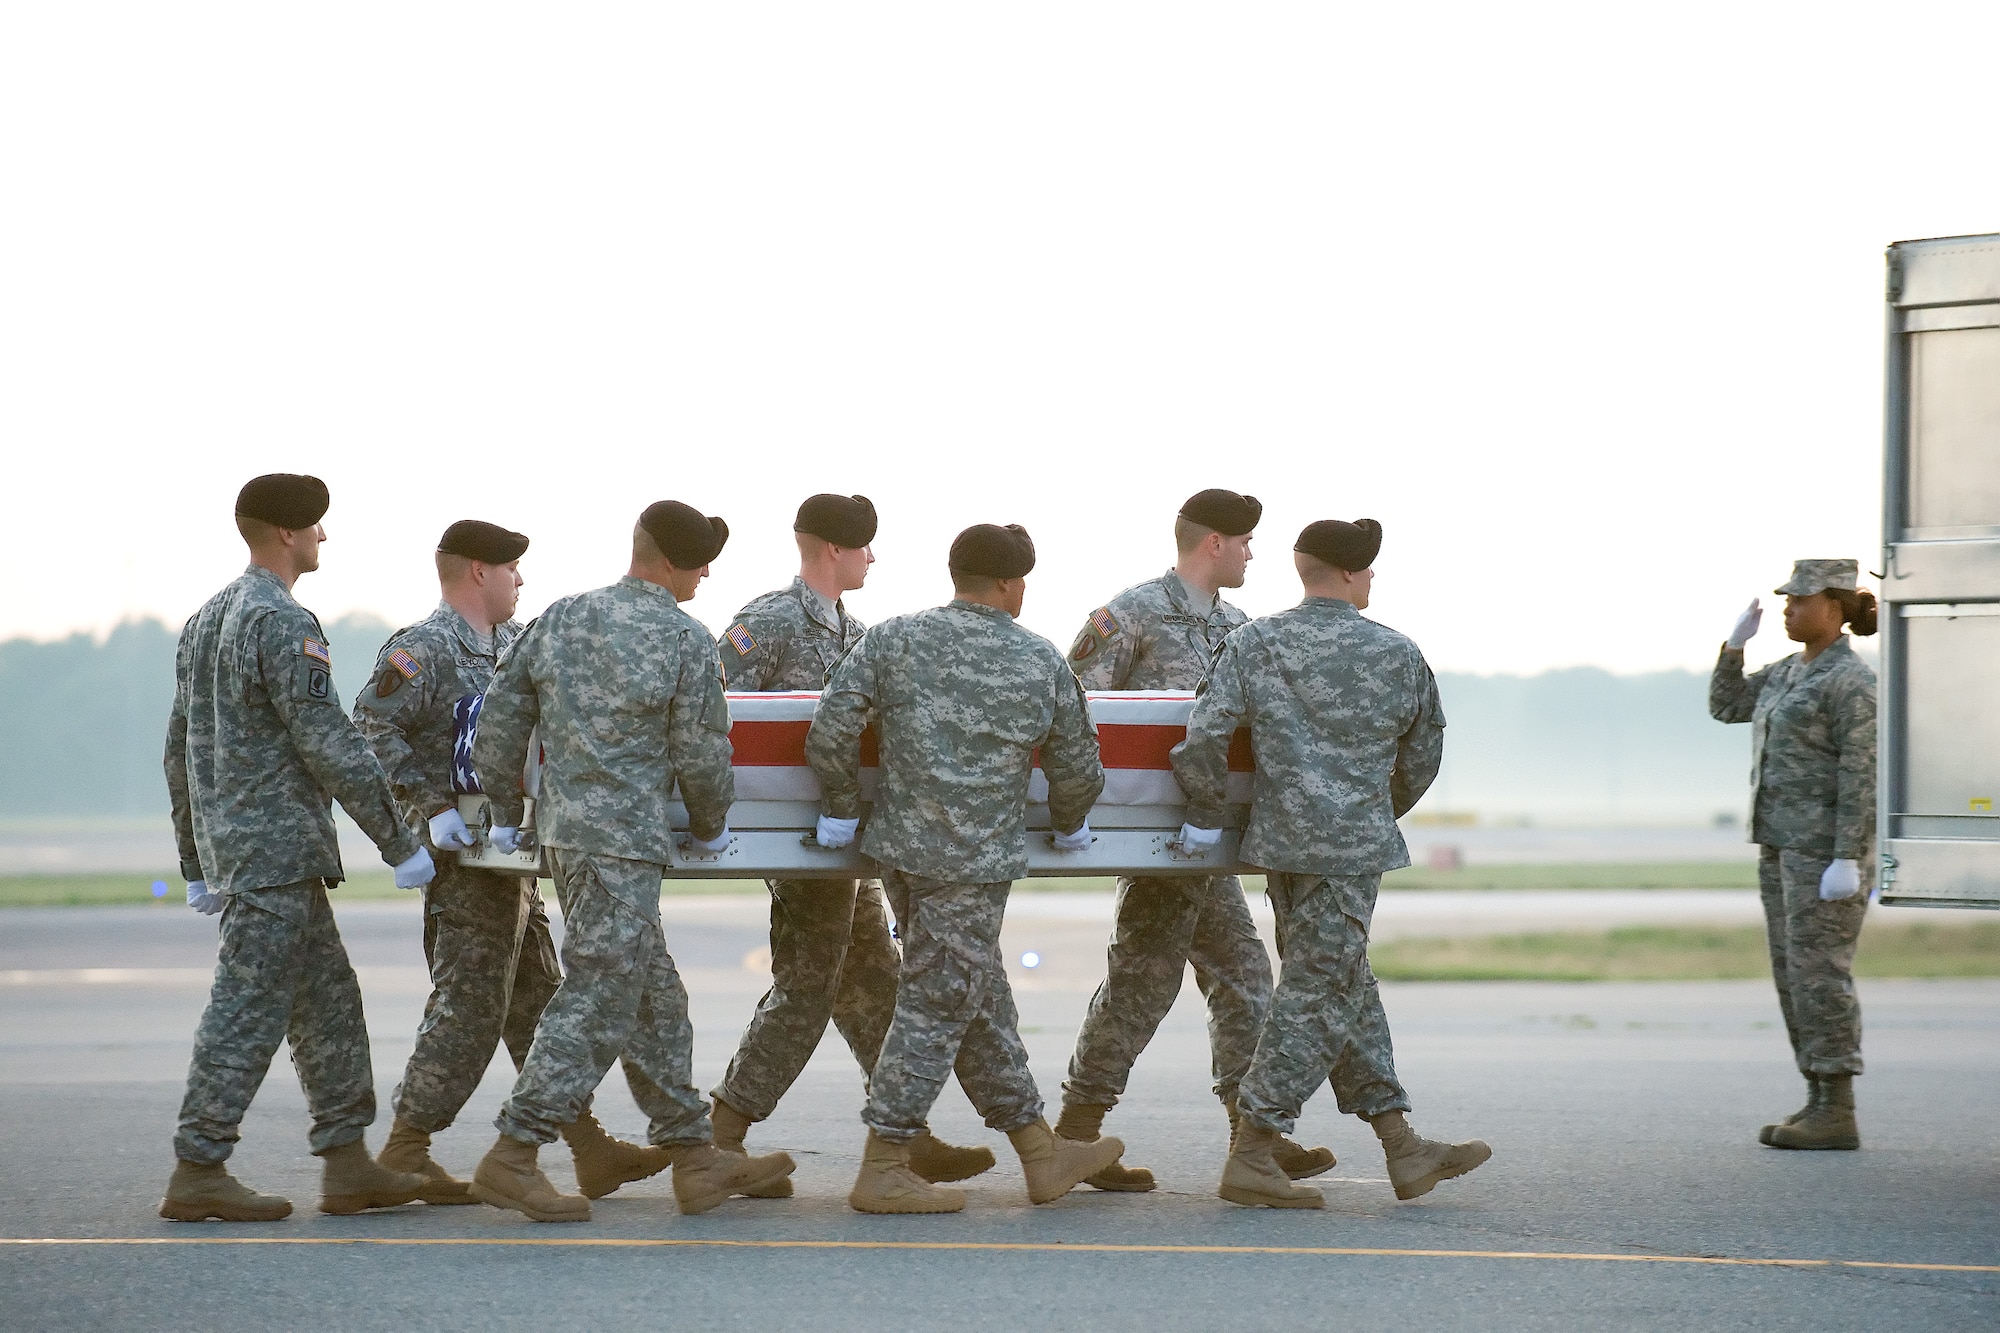 25 June 2010  USAF Photo by Jason Minto.  A U.S. Army carry team transfers the remains of Army PFC Russell E. Madden of Dayton, KY at Dover Air Force Base, Del., June 25, 2010.  